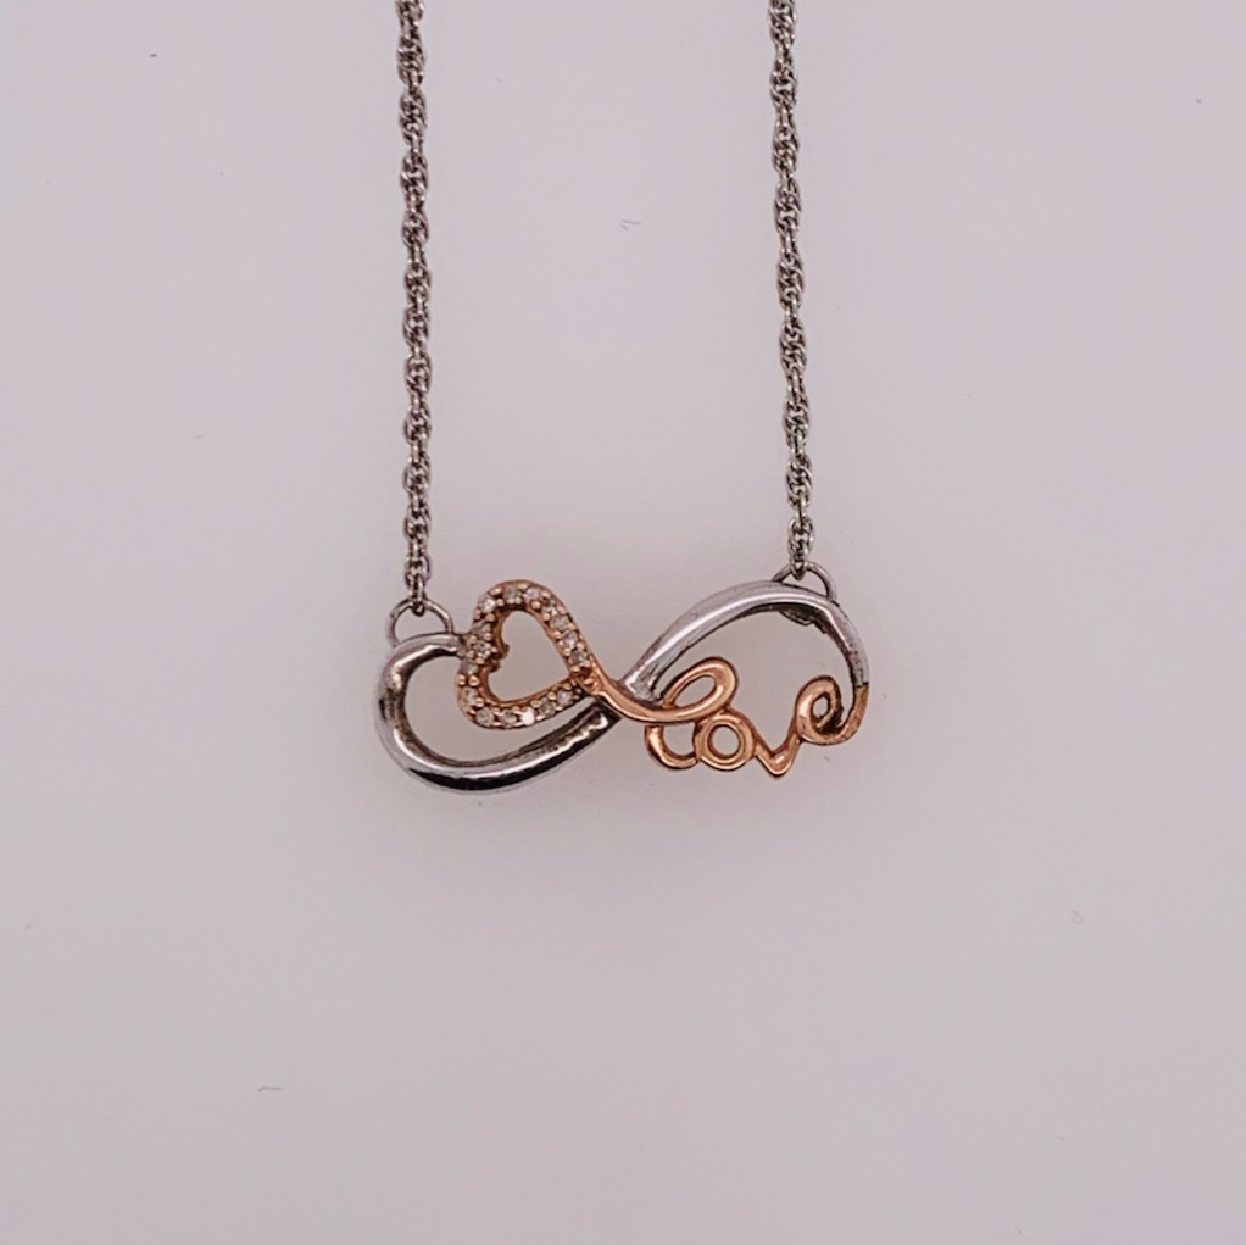 Sterling Silver and Rose Gold Plated Infinity Love Station Necklace with Diamond Accents on an 18 Inch Chain